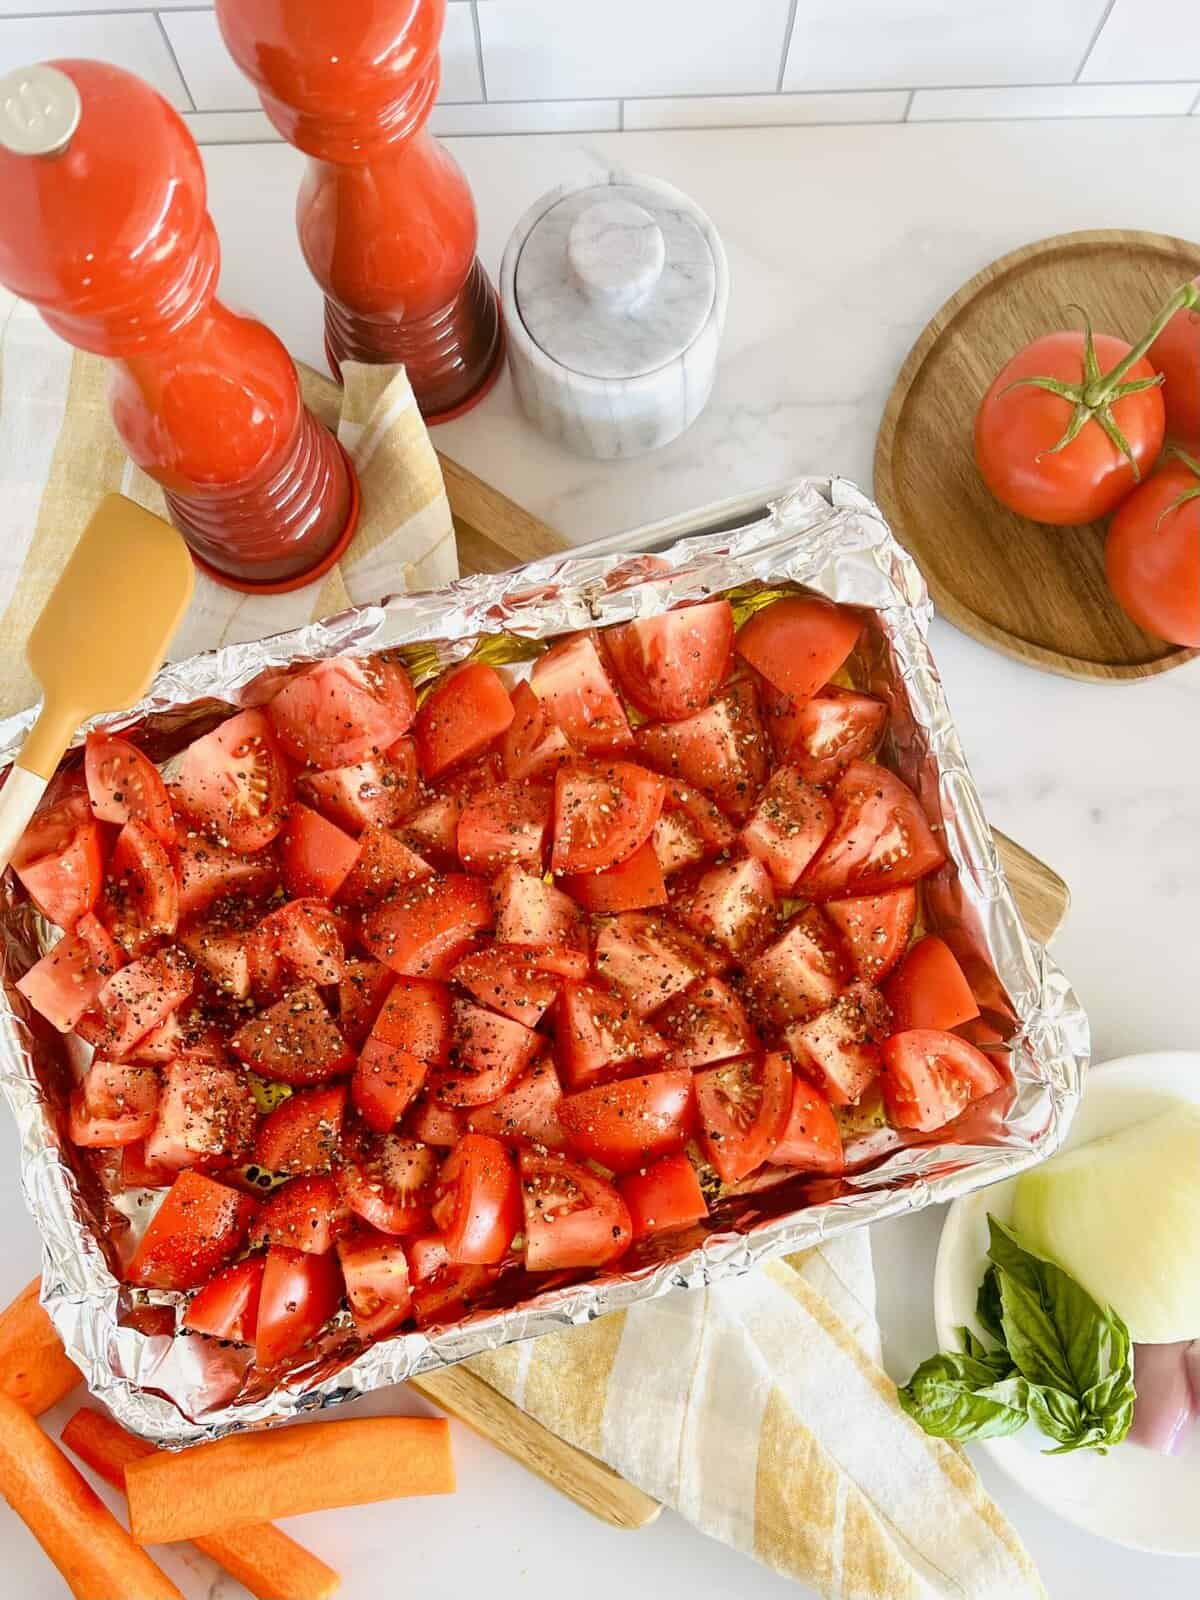 A tray of chopped raw roma tomatoes and other vegetables